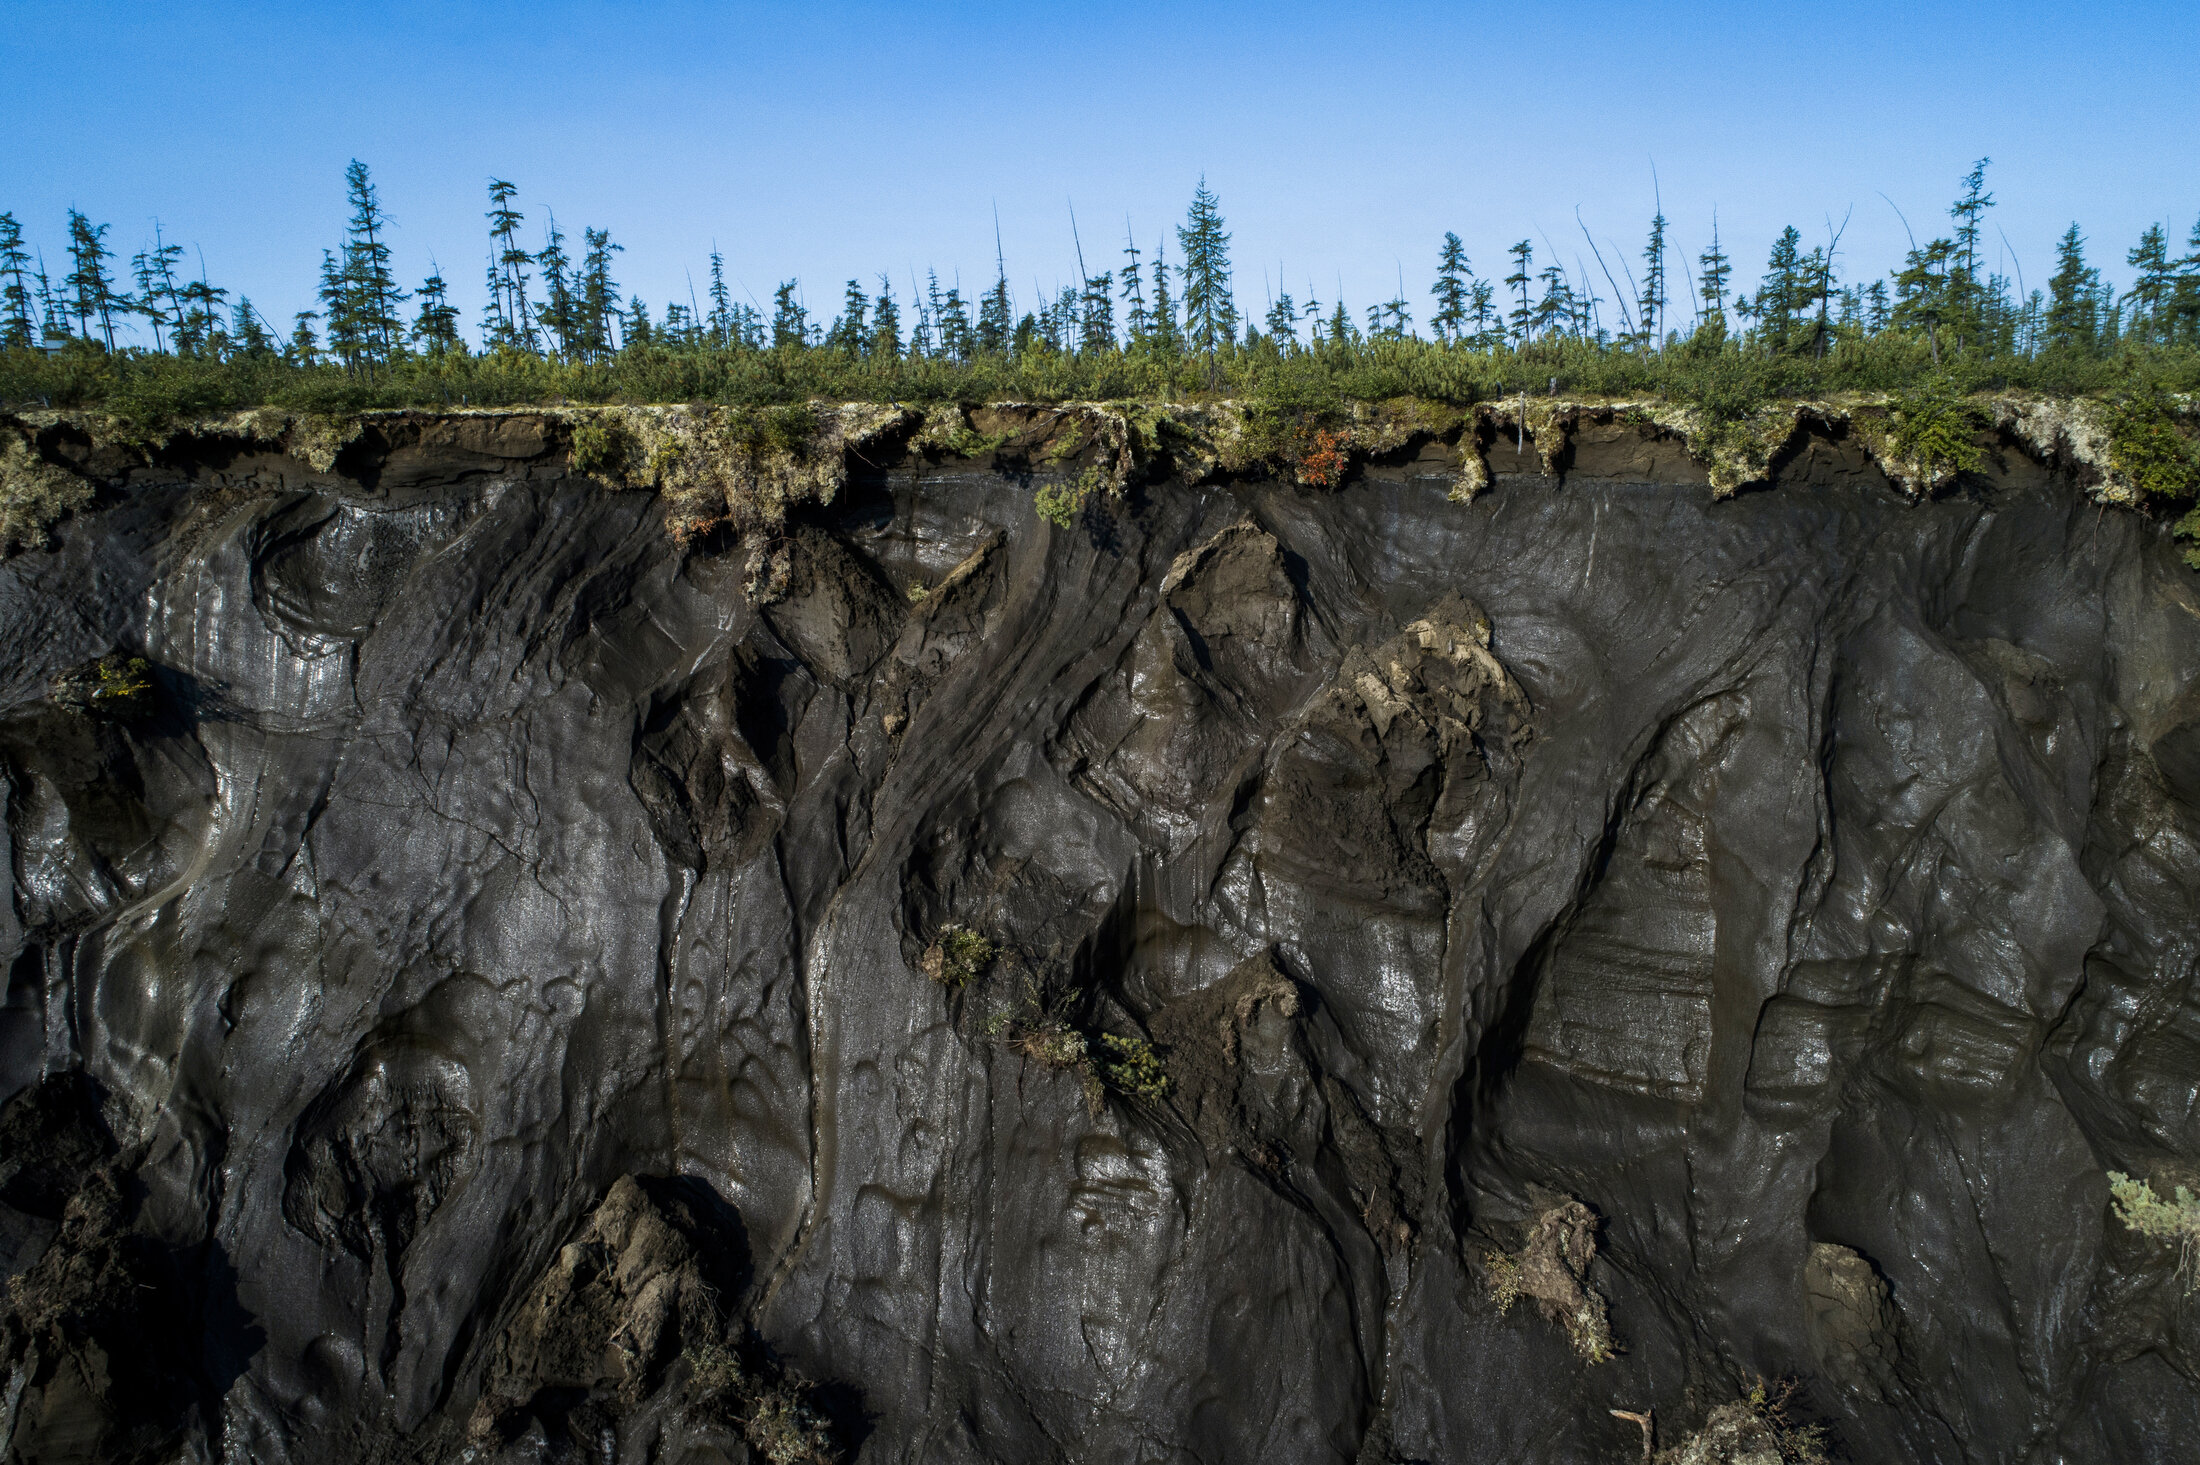  Permafrost along the perimeter of the Batagaika Crater in the Siberian town of Batagay, Russia. It has been called the "hell crater" or the "gateway to the underworld.Ó Over 300 feet deep and 1 kilometer long, this thermokarst depression is one of t